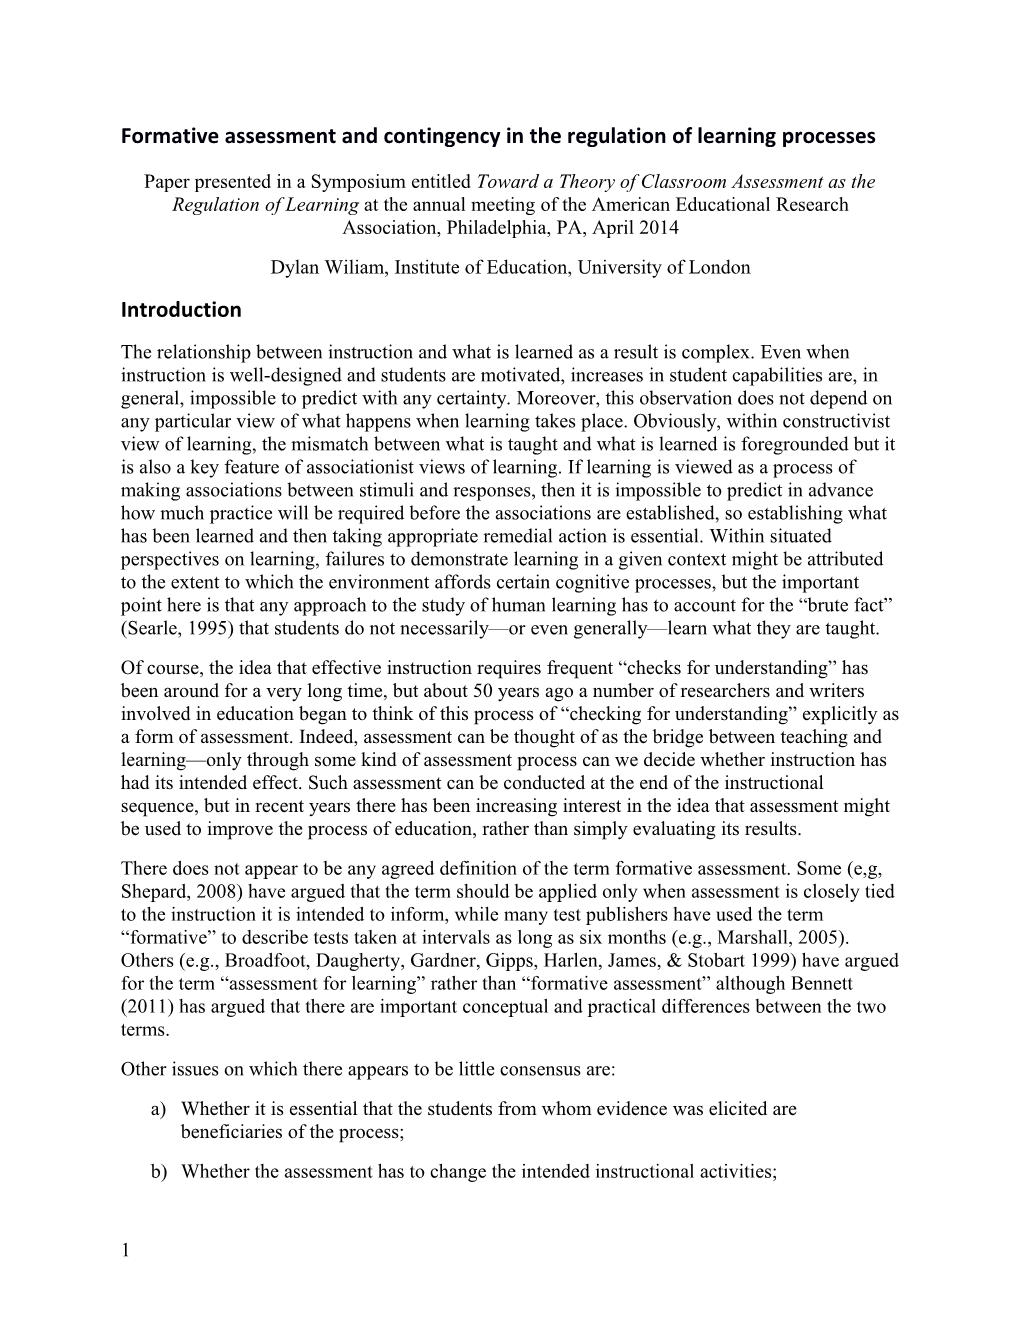 Formative Assessment and Contingency in the Regulation of Learning Processes